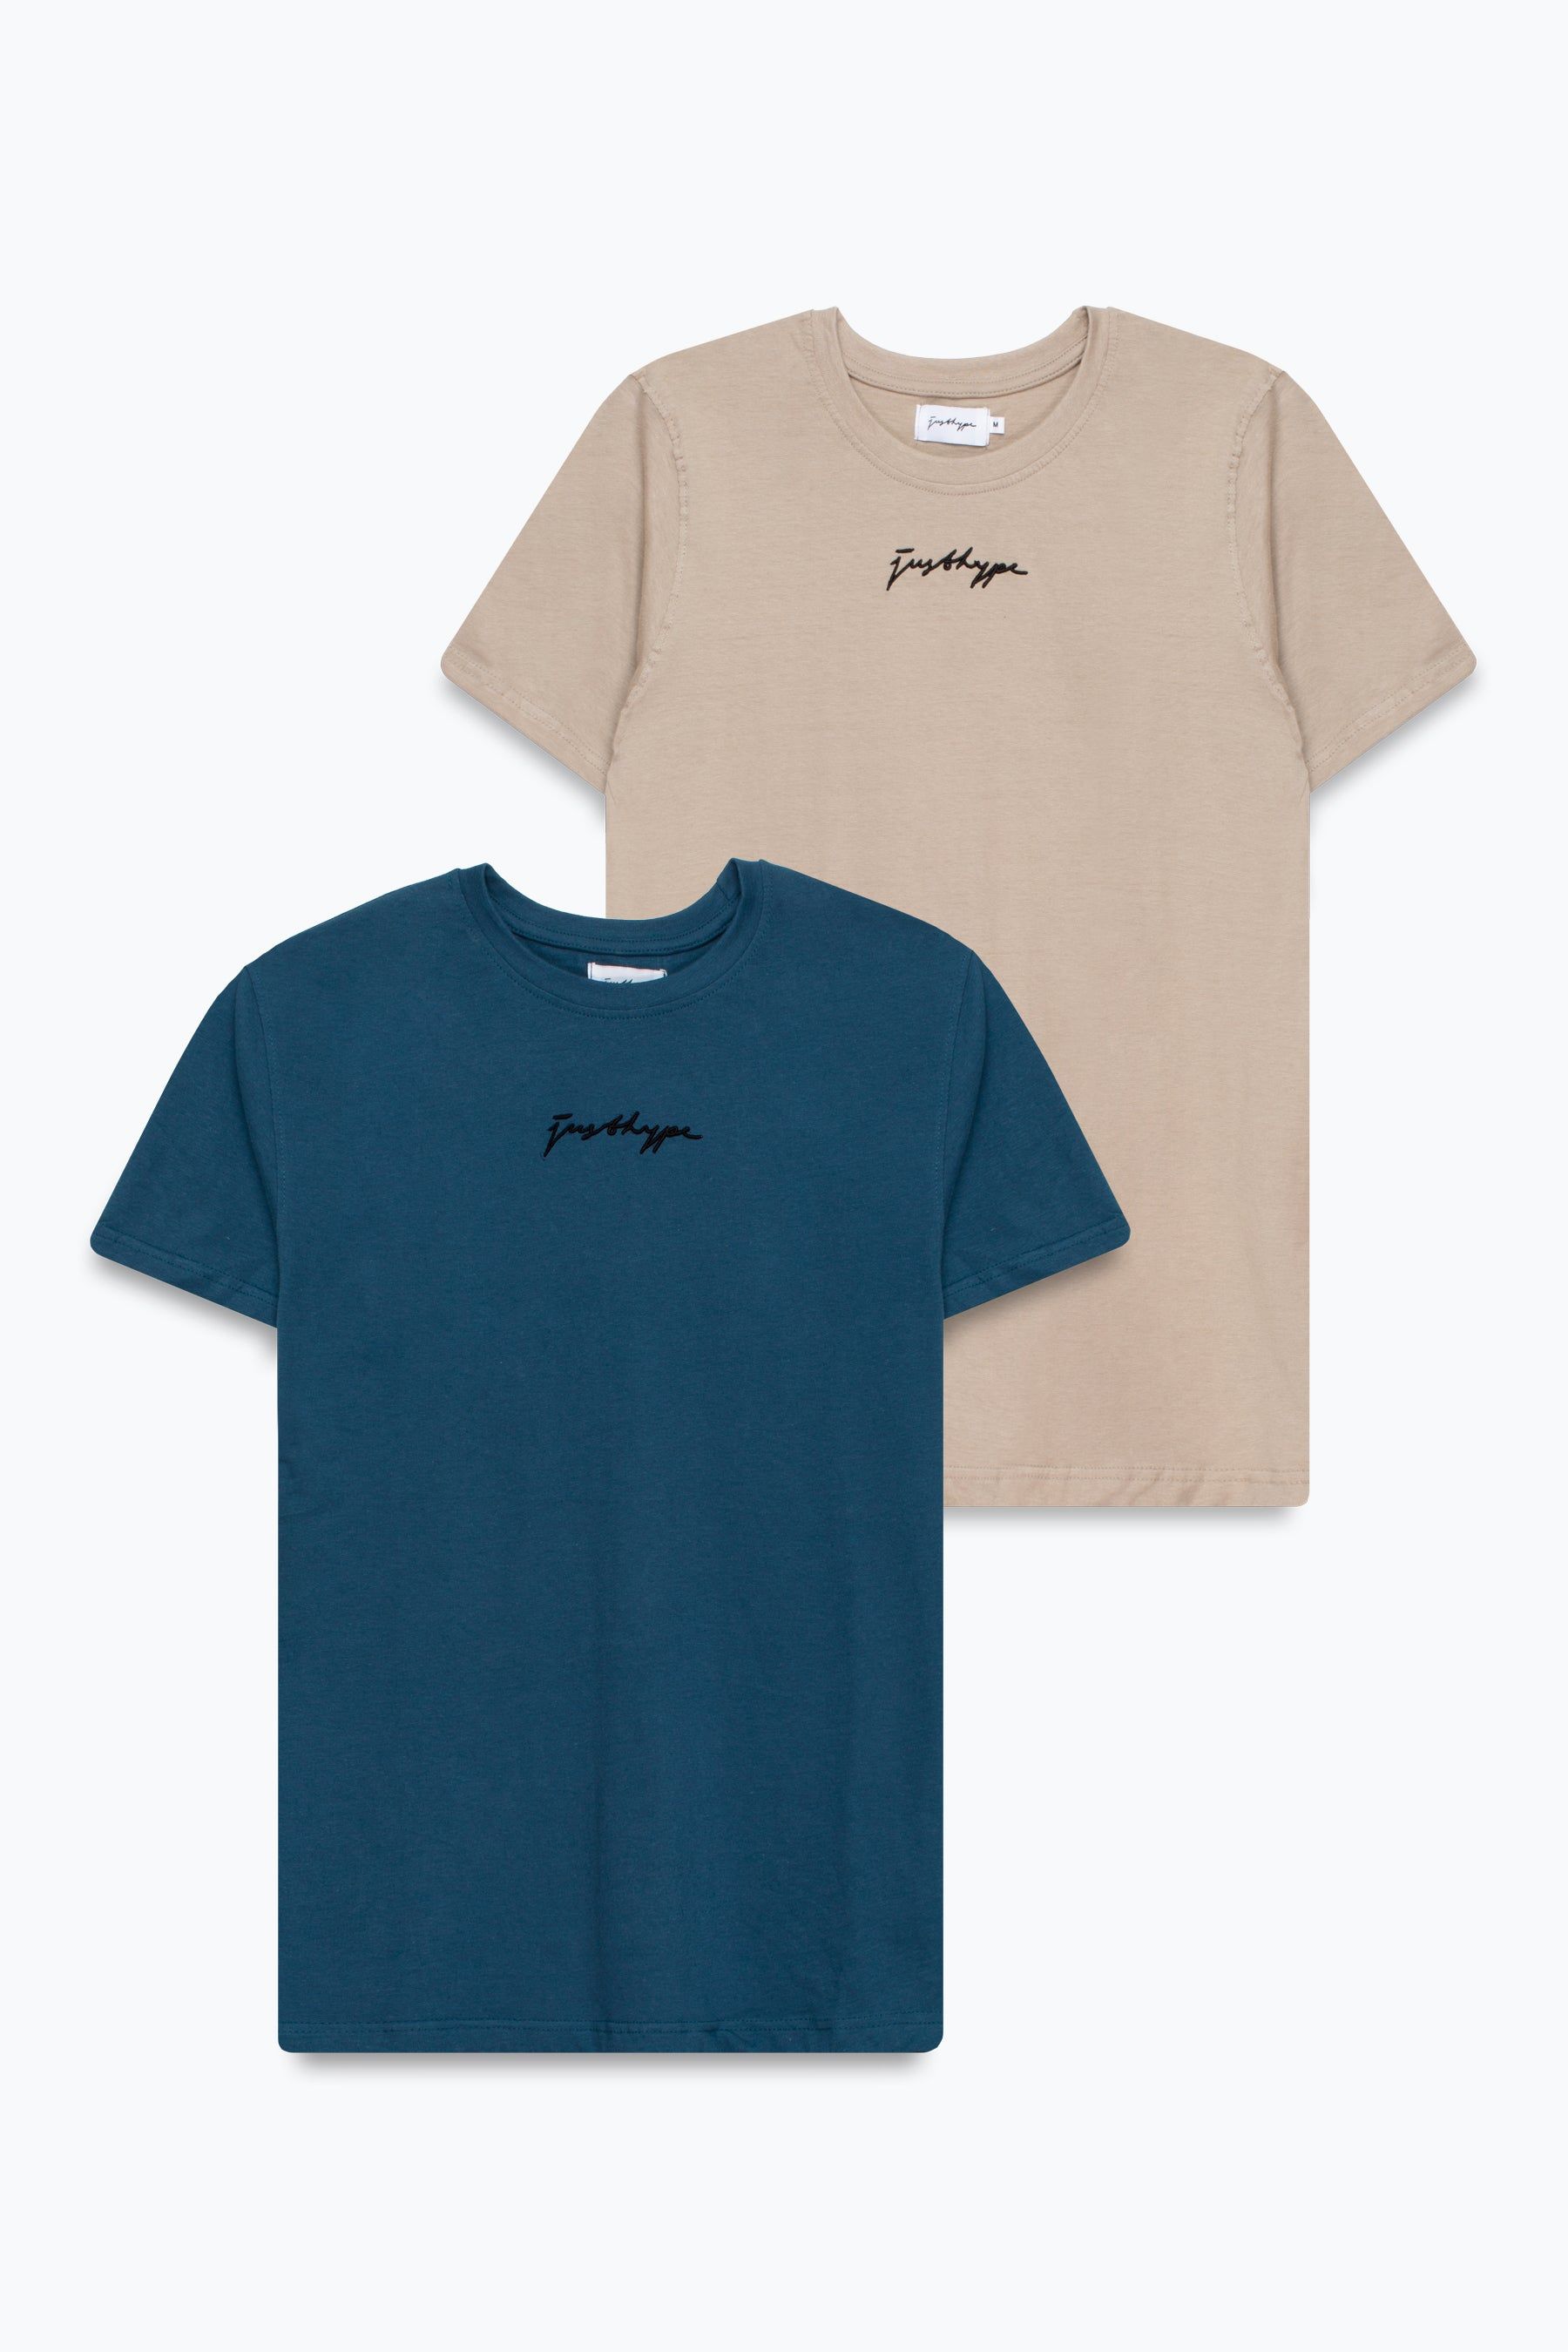 Make the most of your spending and stock up on our Men's multi-pack oversized t-shirts. Each tee is designed with a soft-touch fabric base for the ultimate comfort and breathable fabric. Highlighting an oversized shape, crew neckline and enlarged sleeves for a trending fit. Your everyday tees just got simpler. The model wears a size M. Machine washable.